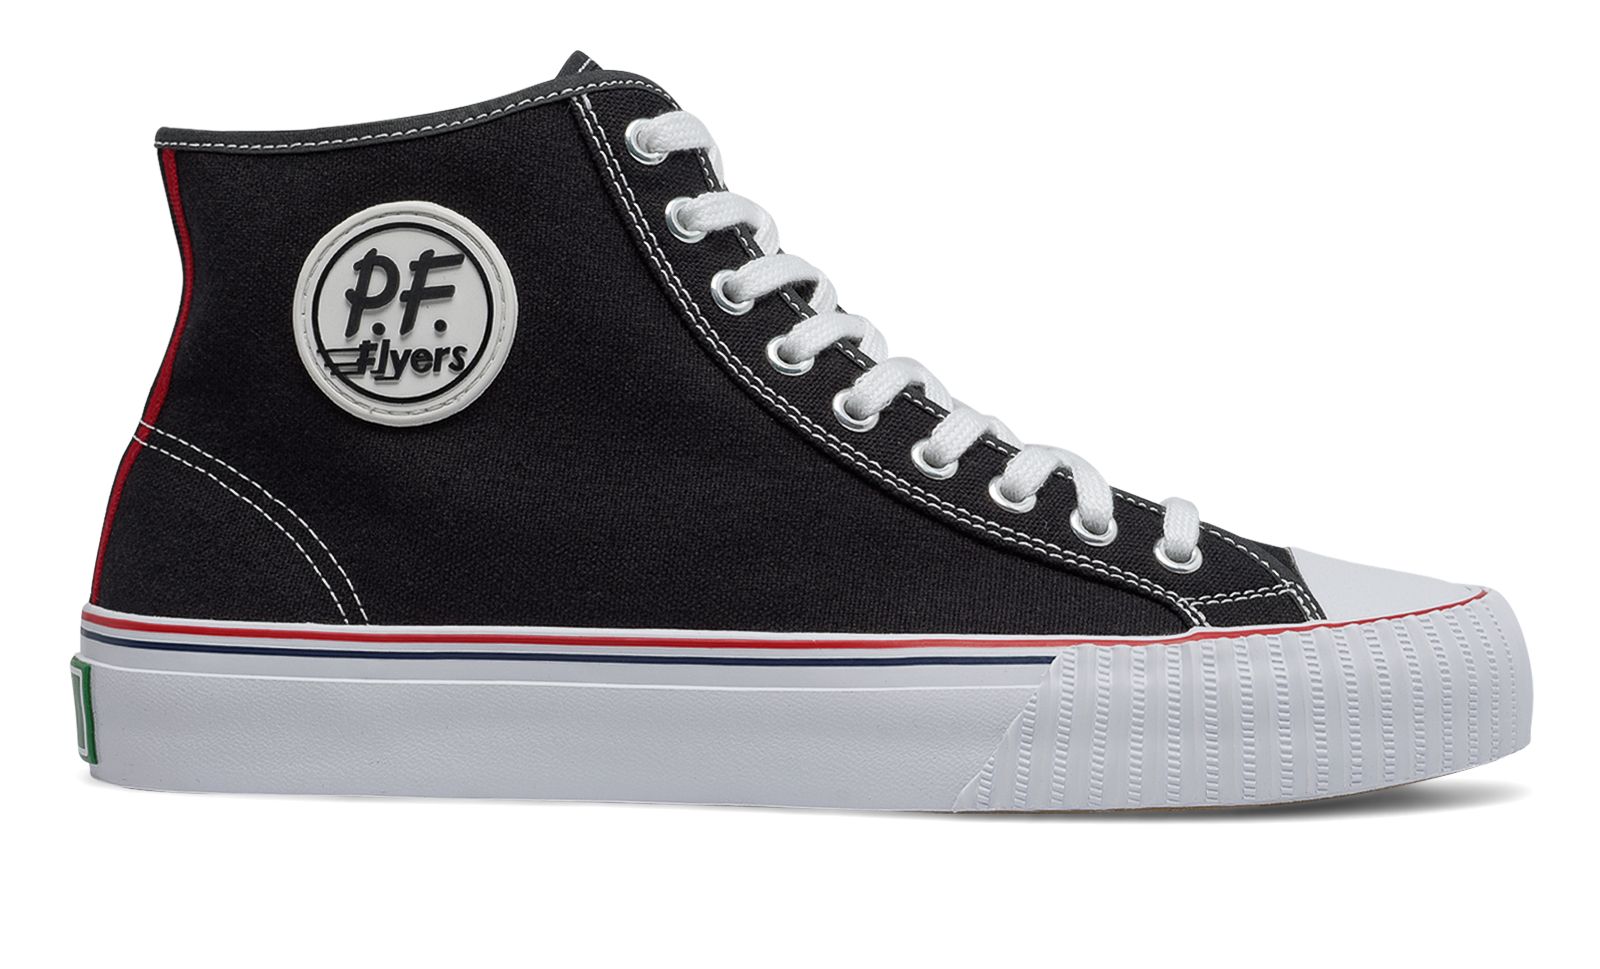 pf flyers or converse